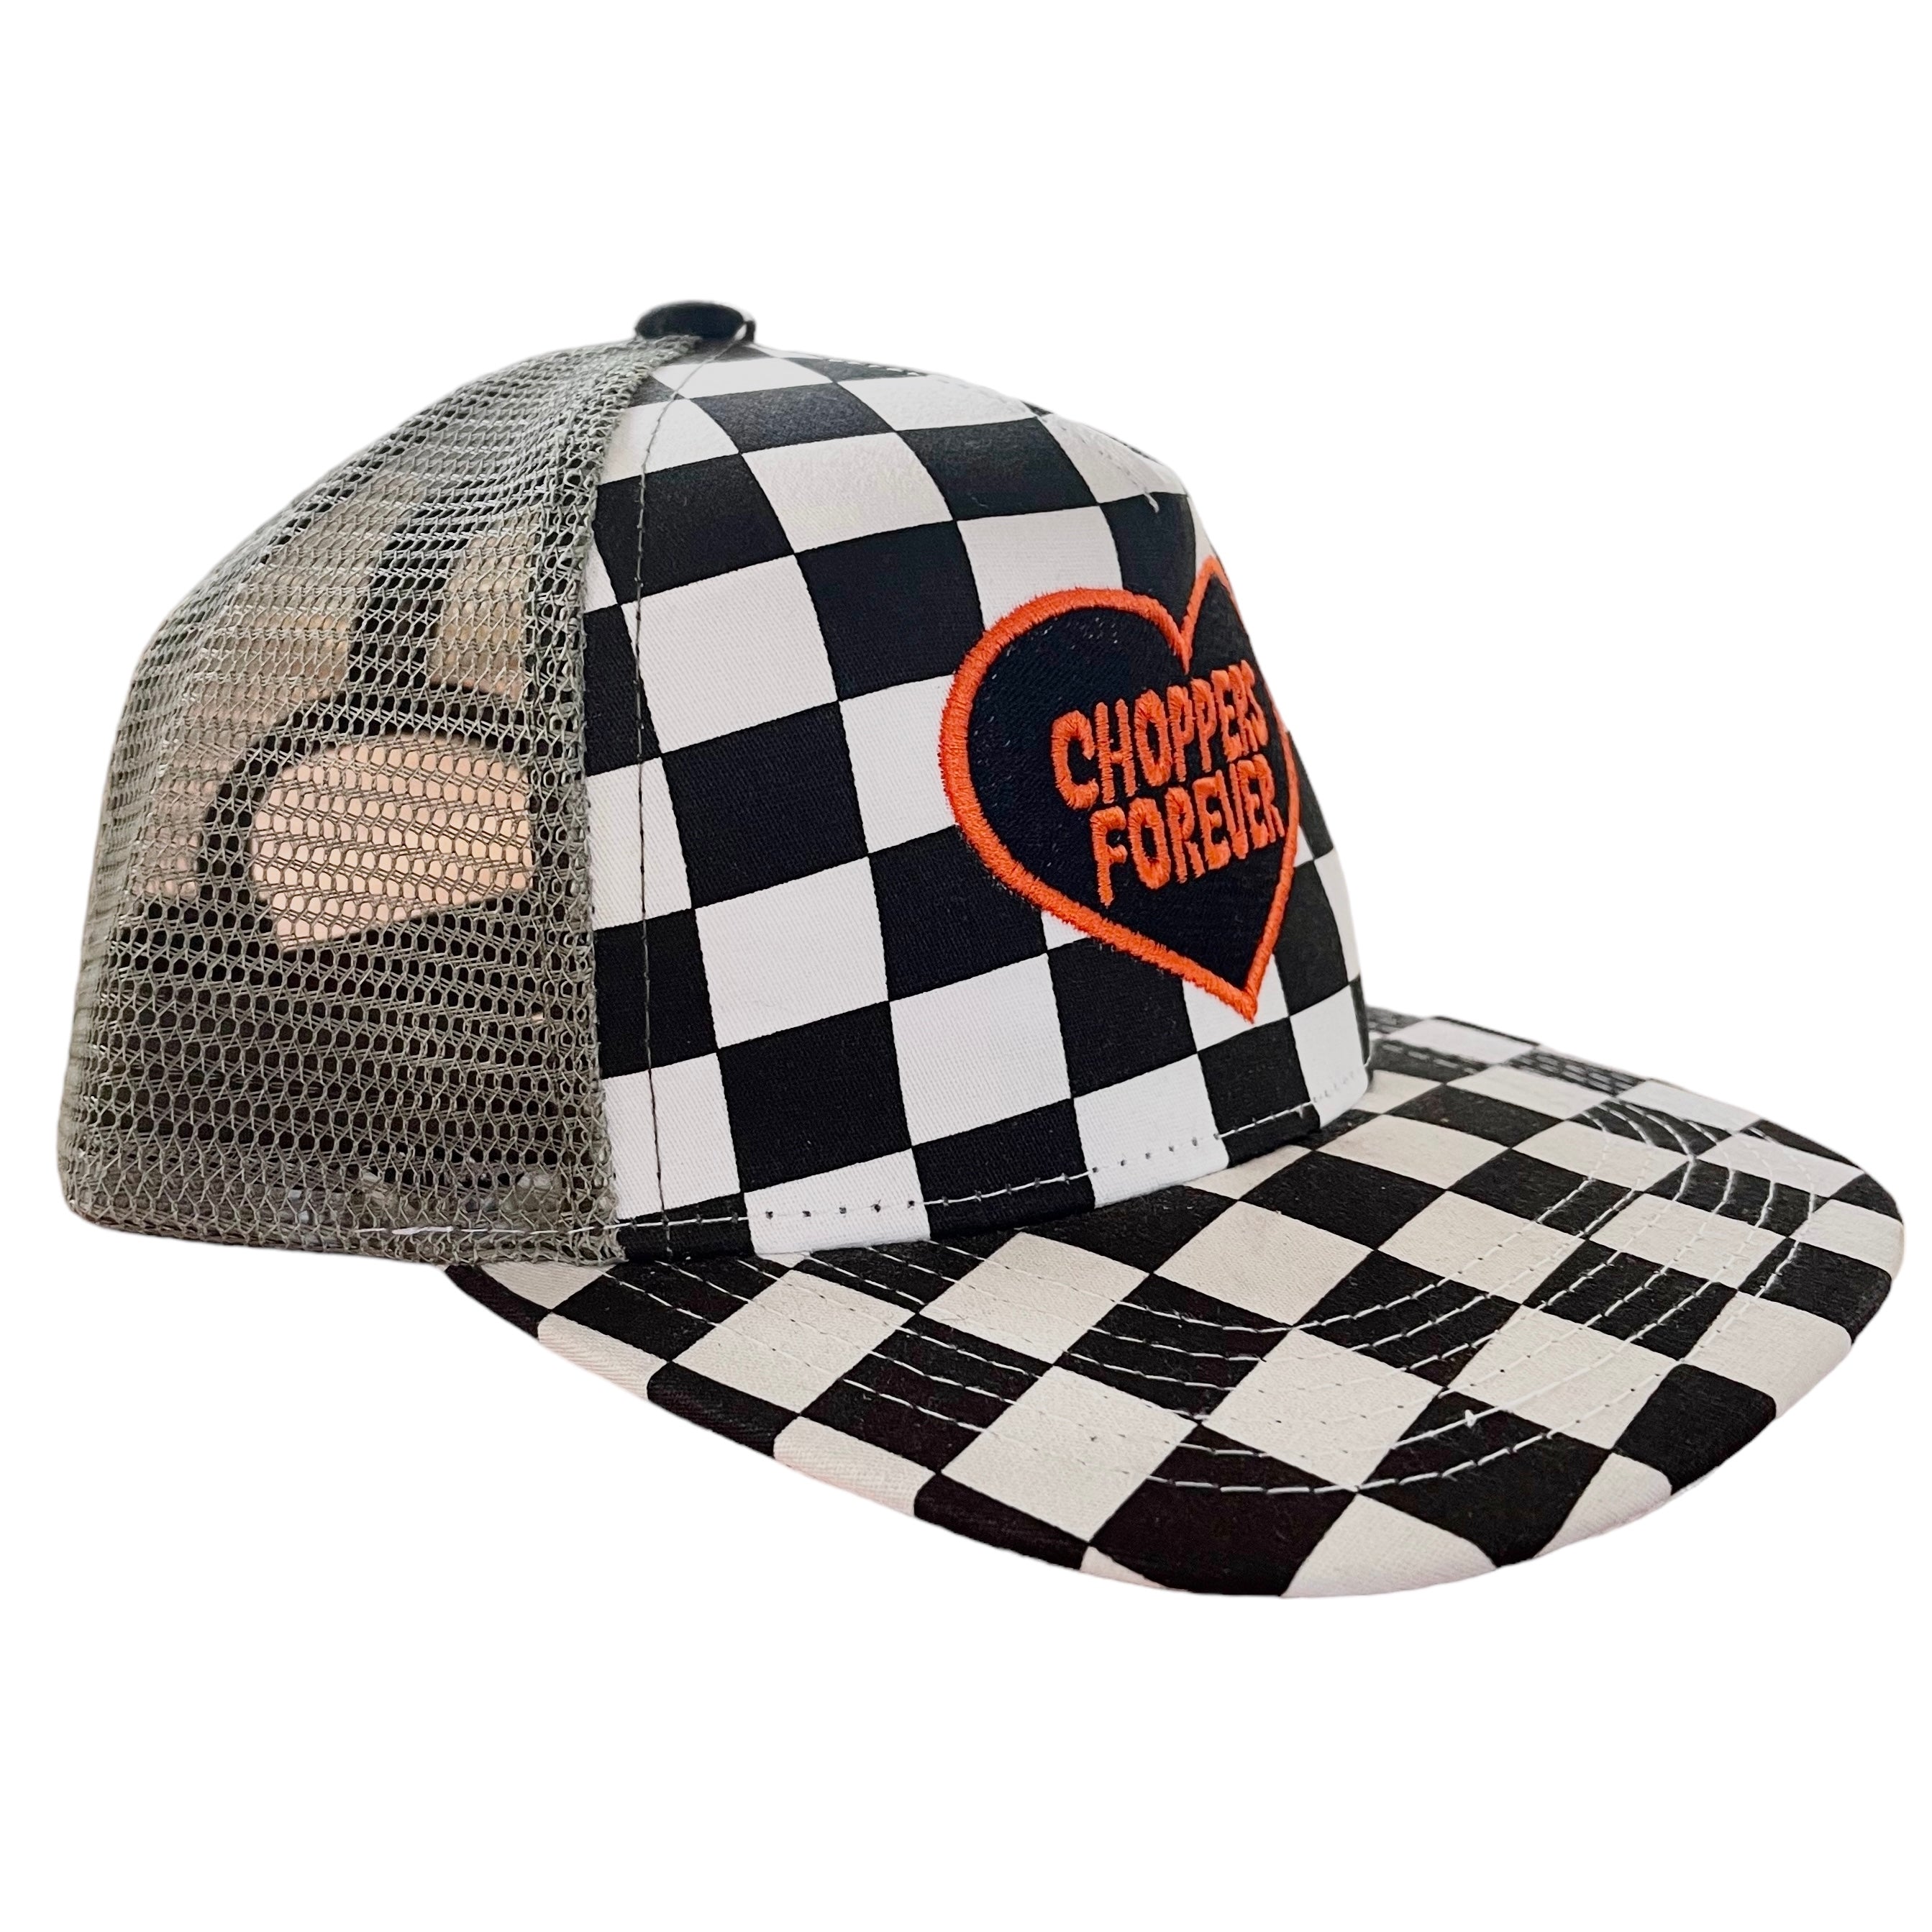 KIDS Choppers Forever Embroidered Checkered Hat